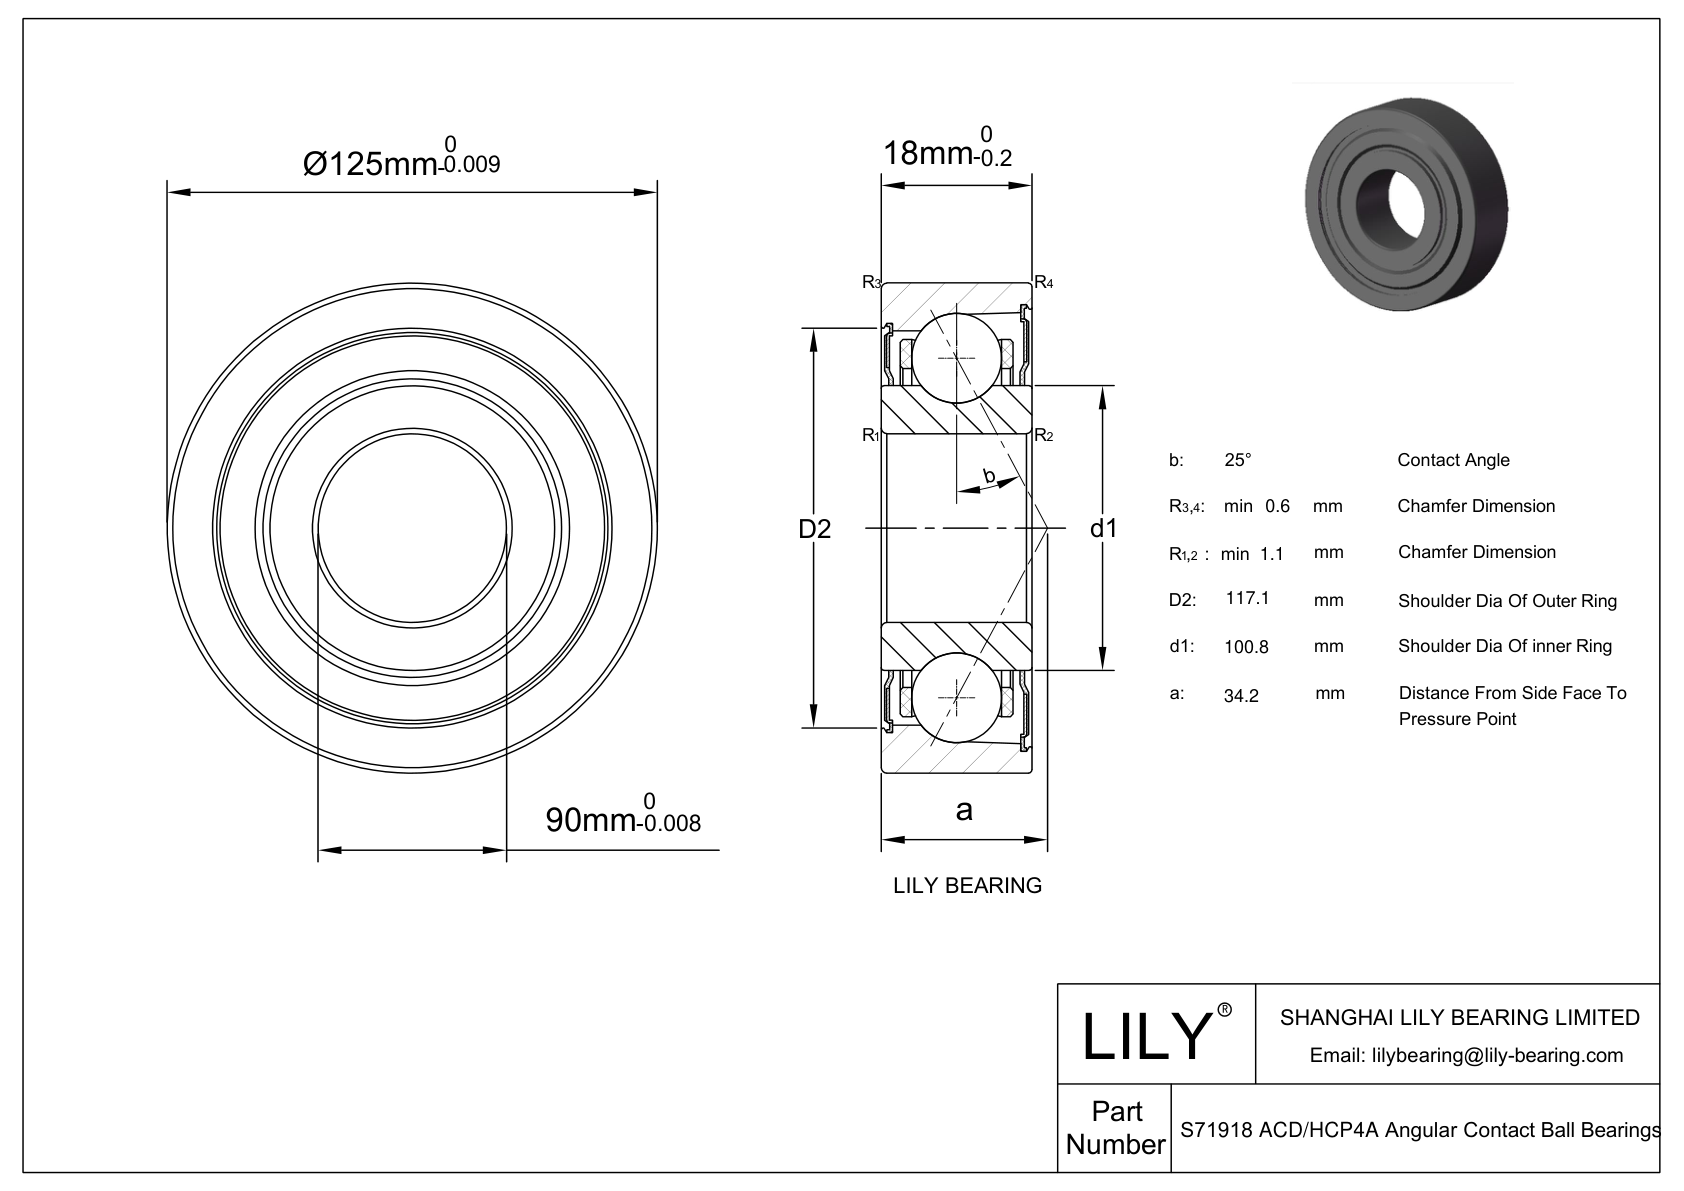 S71918 ACD/HCP4A Super Precision Angular Contact Ball Bearings cad drawing